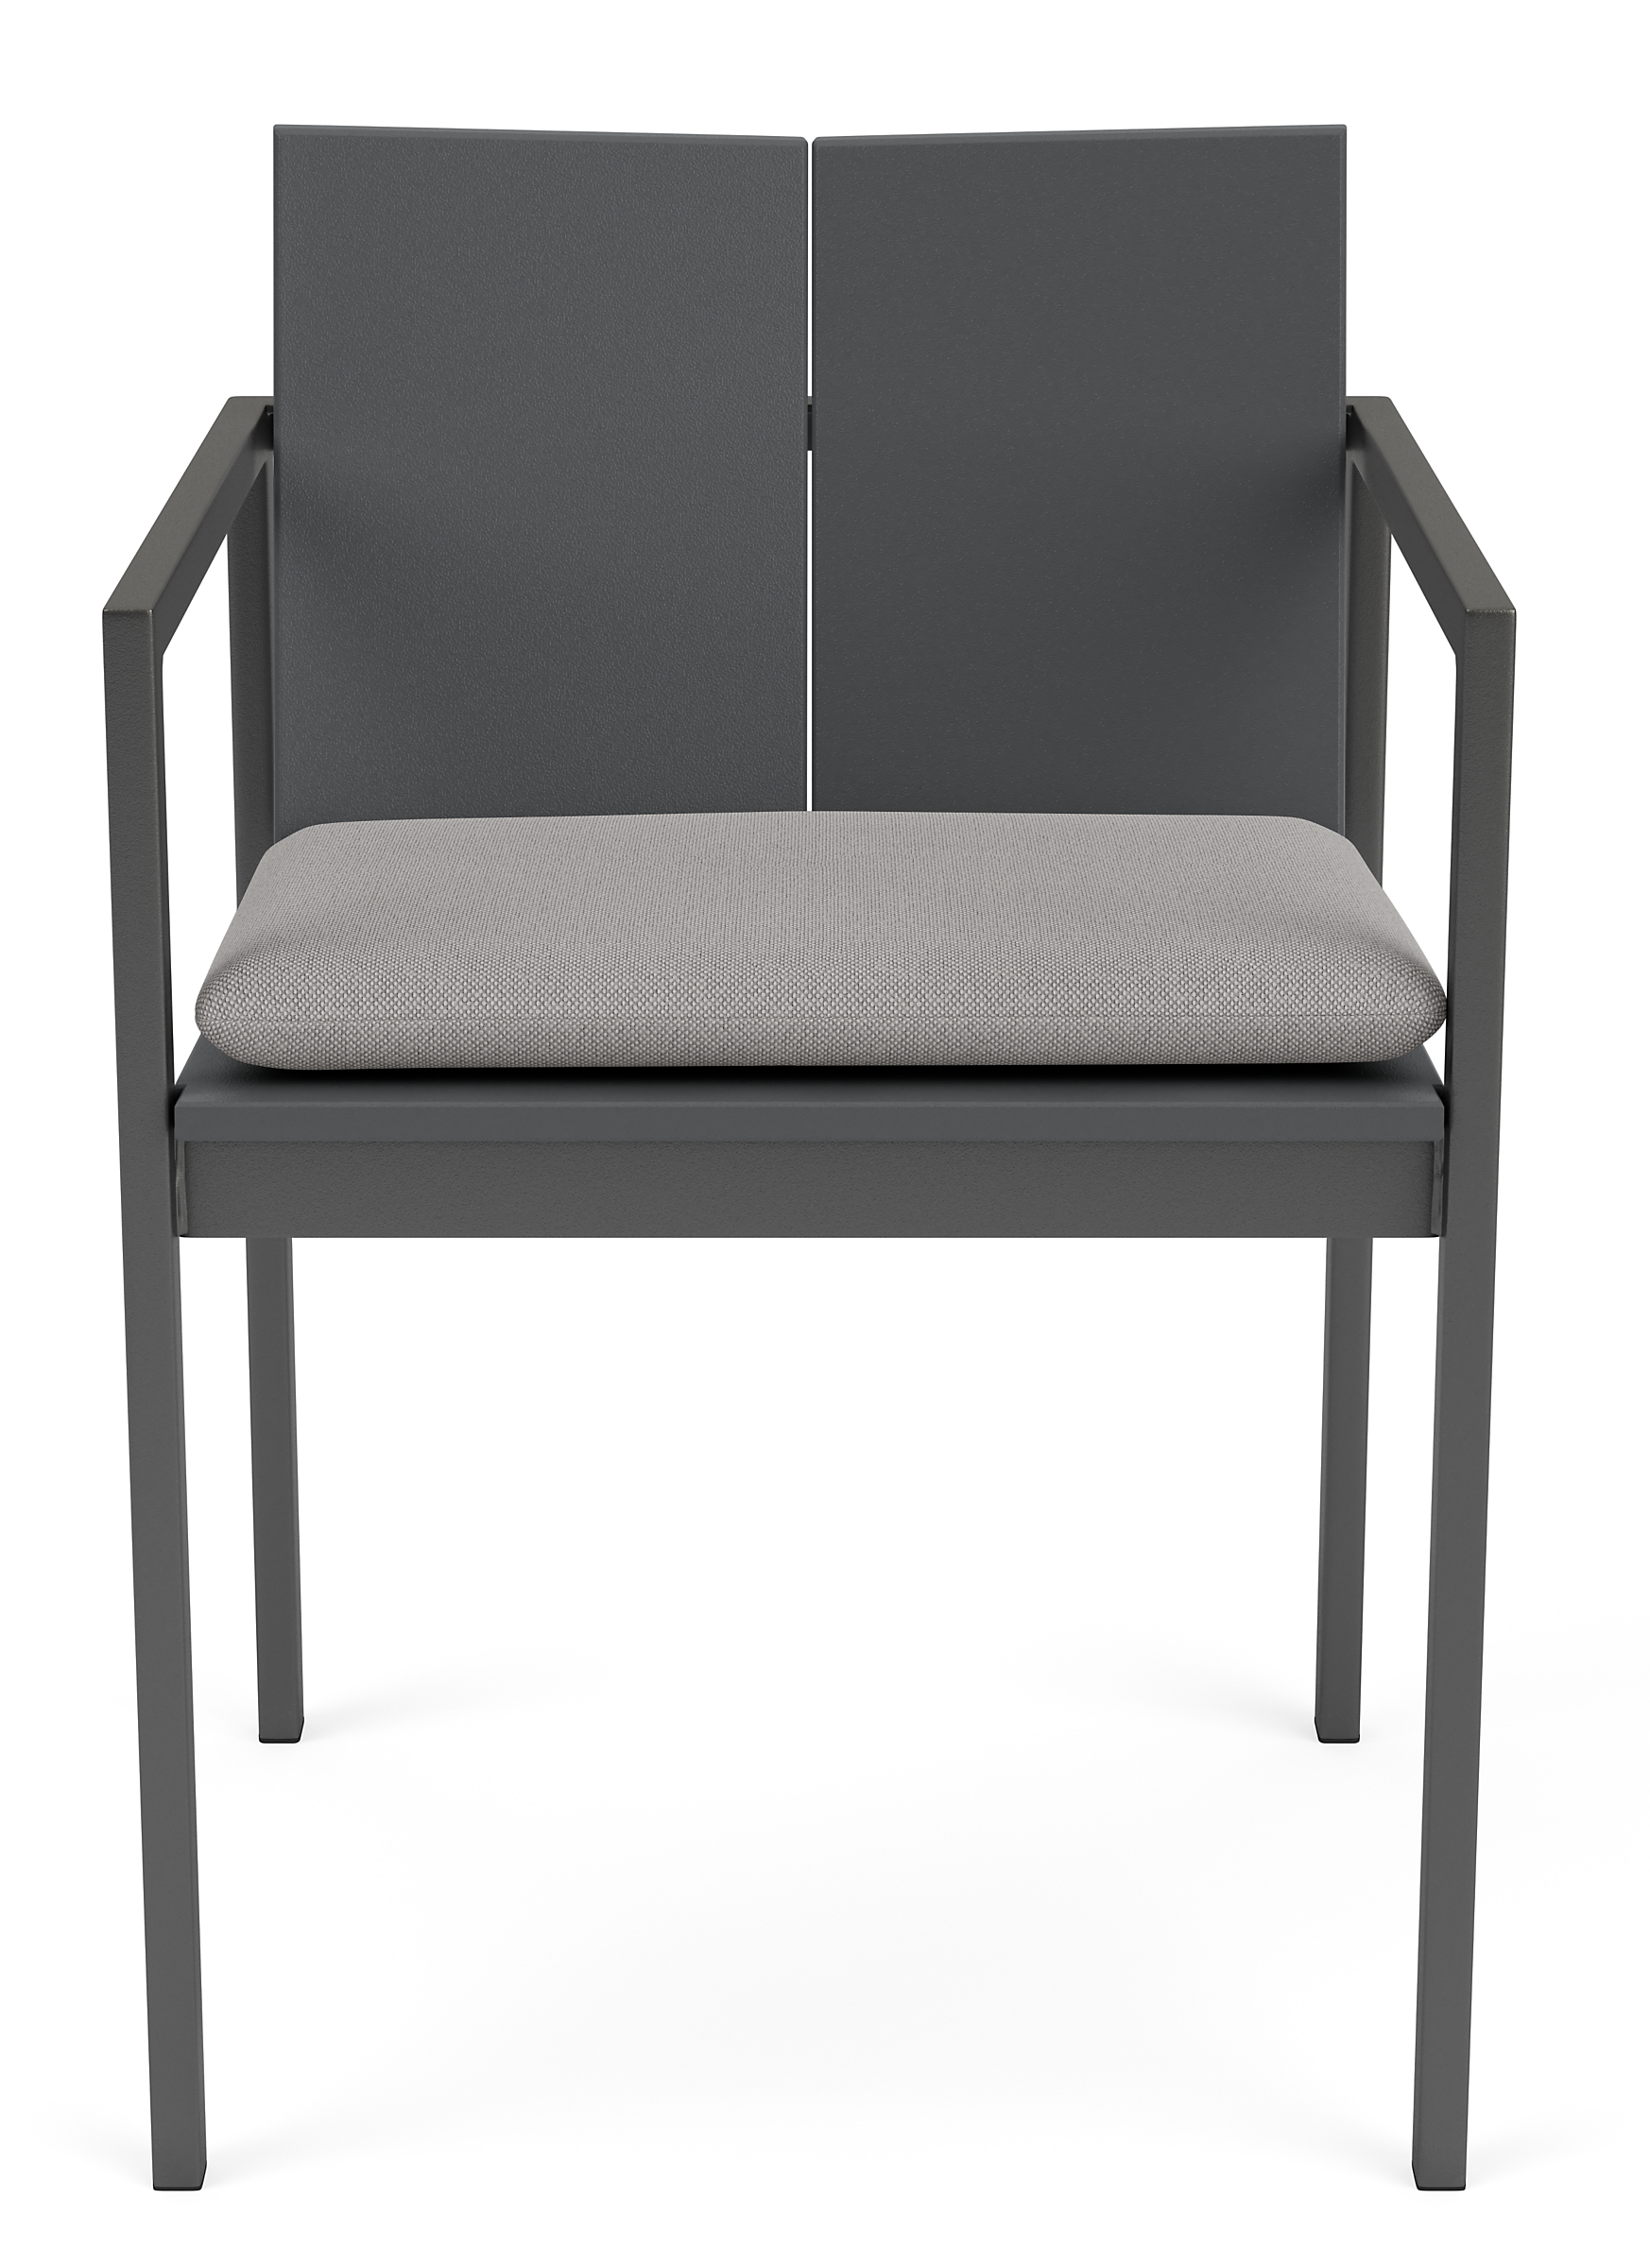 Front view of Mattix Arm Chair in Grey HDPE with Pelham Grey Cushion.